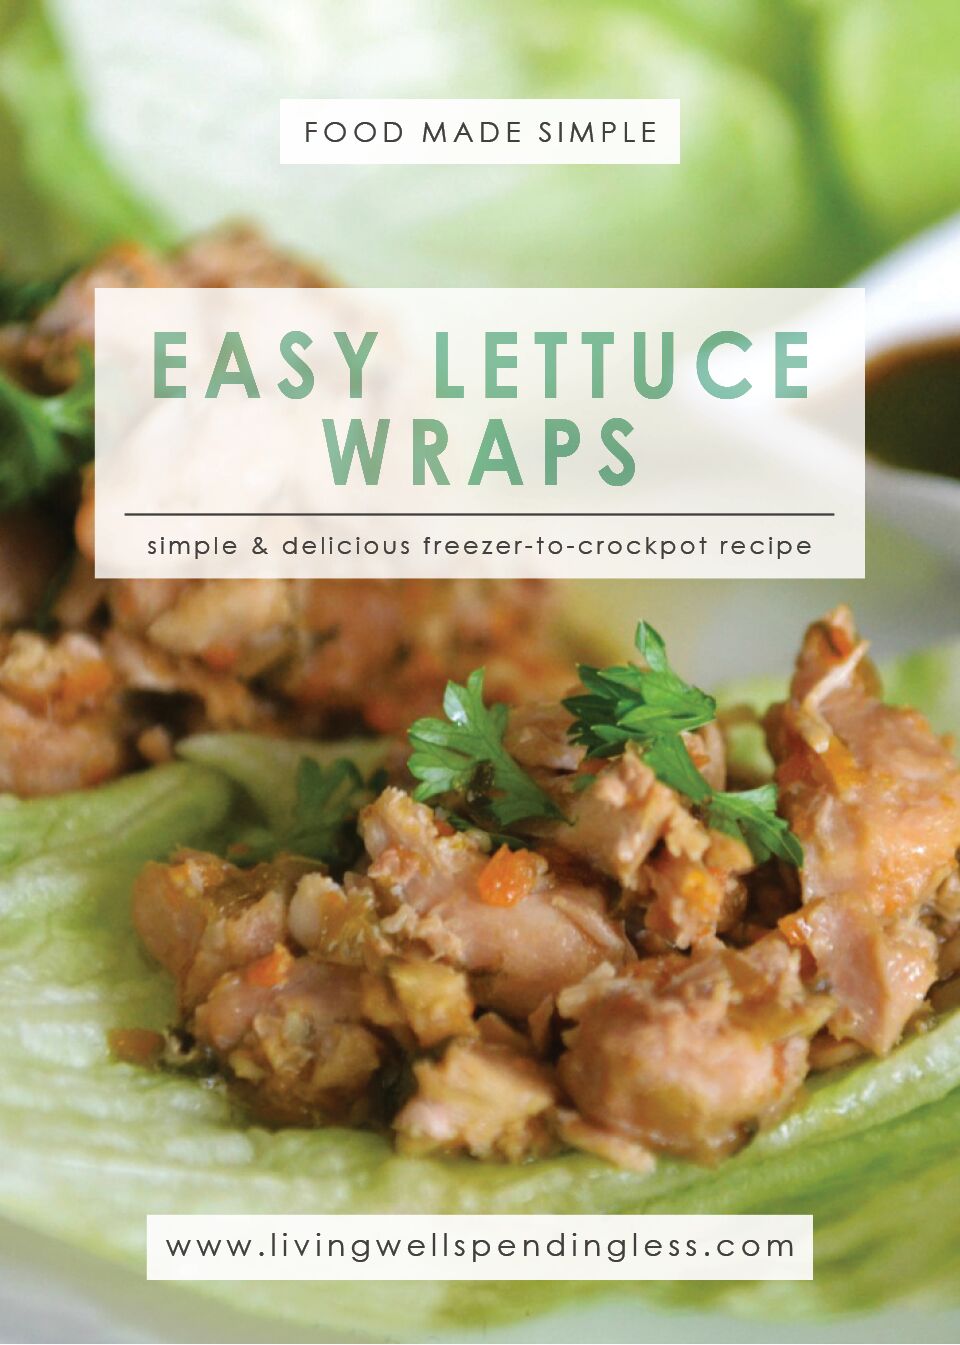 Easy Crockpot Lettuce Wraps: A Simple and Delicious Freezer-to-Crockpot Recipe